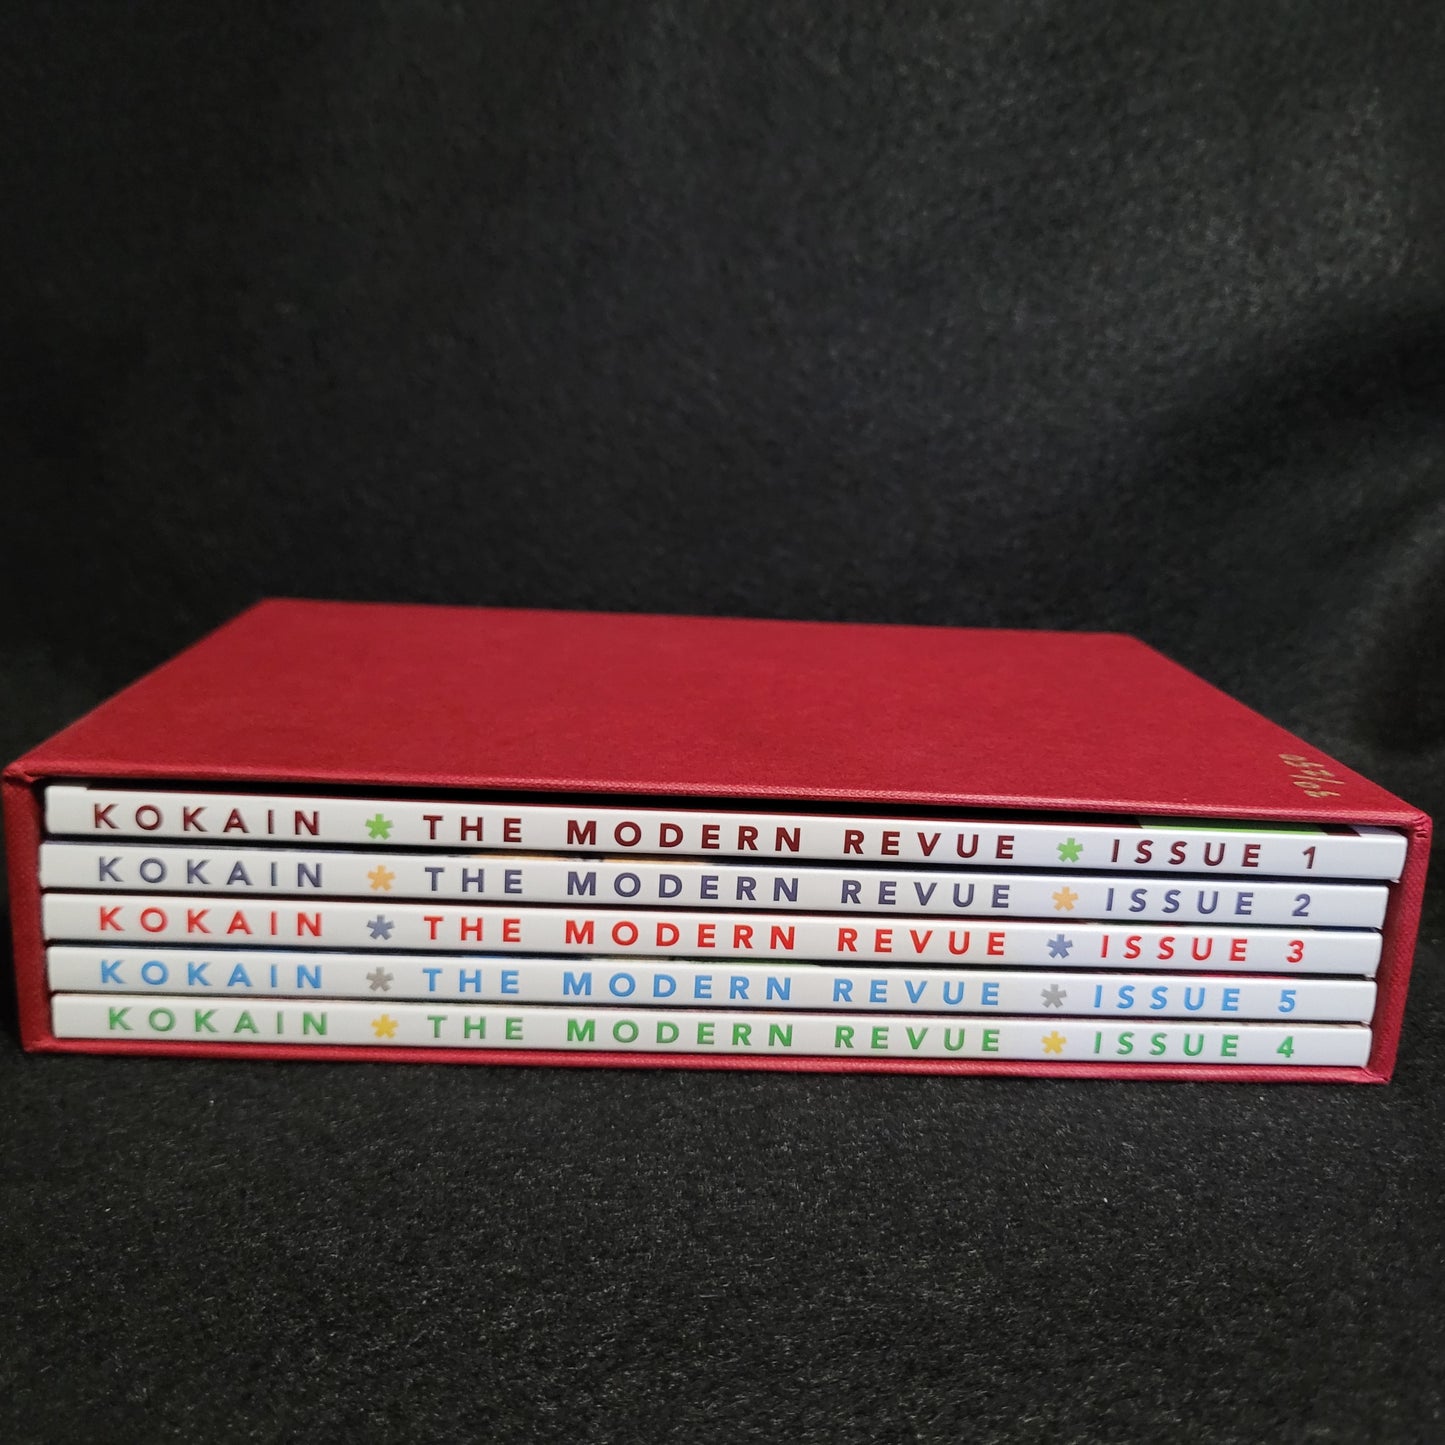 Kokain - The Modern Revue (Side Real Press) Five Volumes Limited to 250 copies